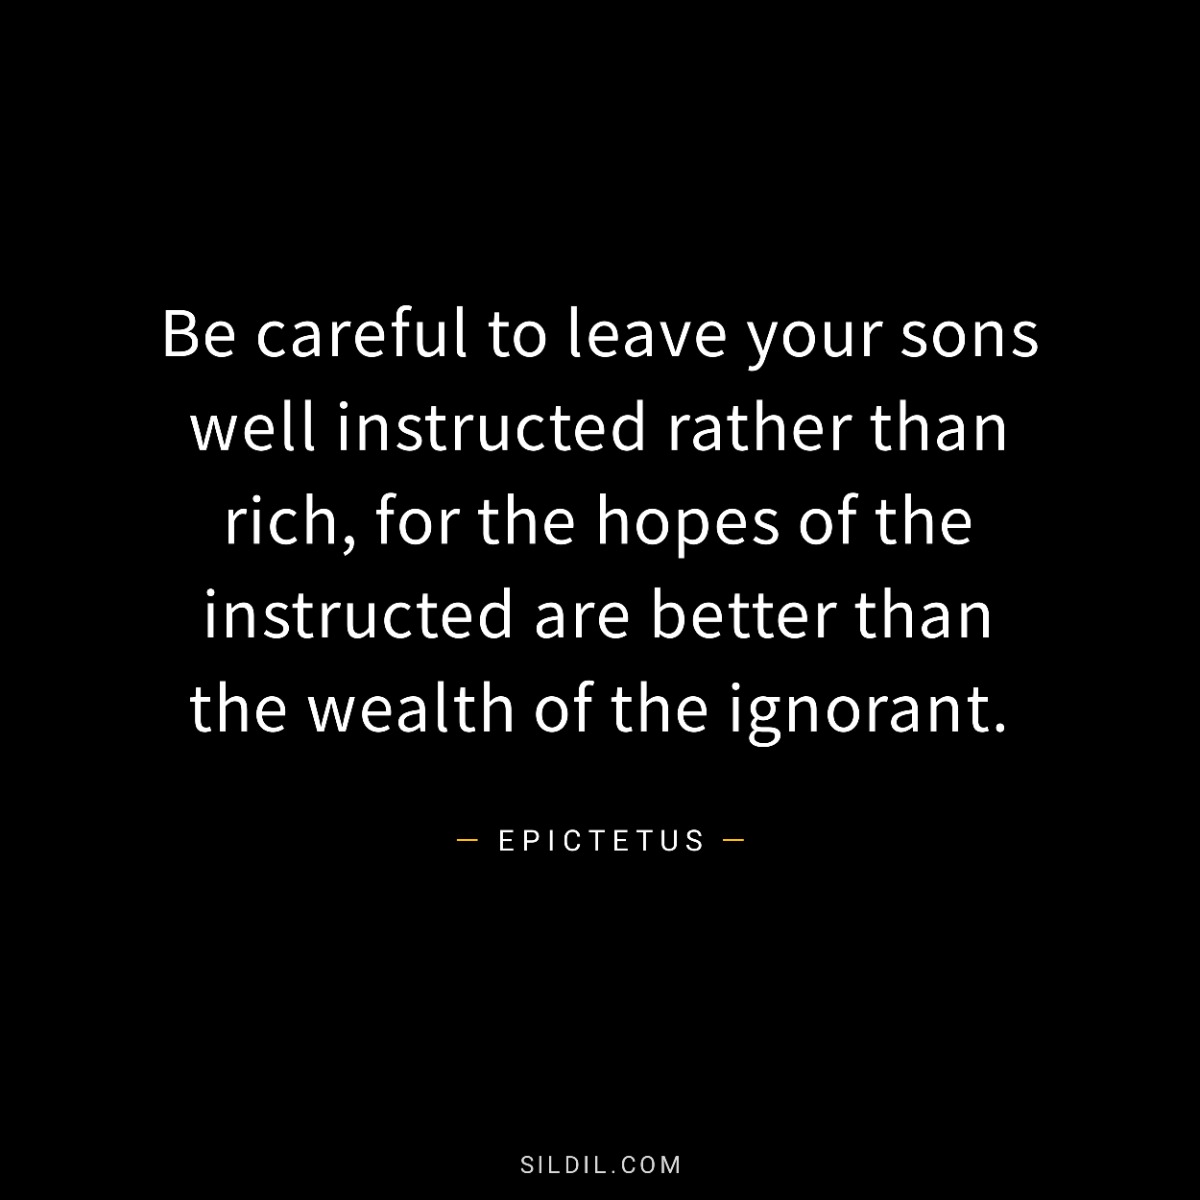 Be careful to leave your sons well instructed rather than rich, for the hopes of the instructed are better than the wealth of the ignorant.